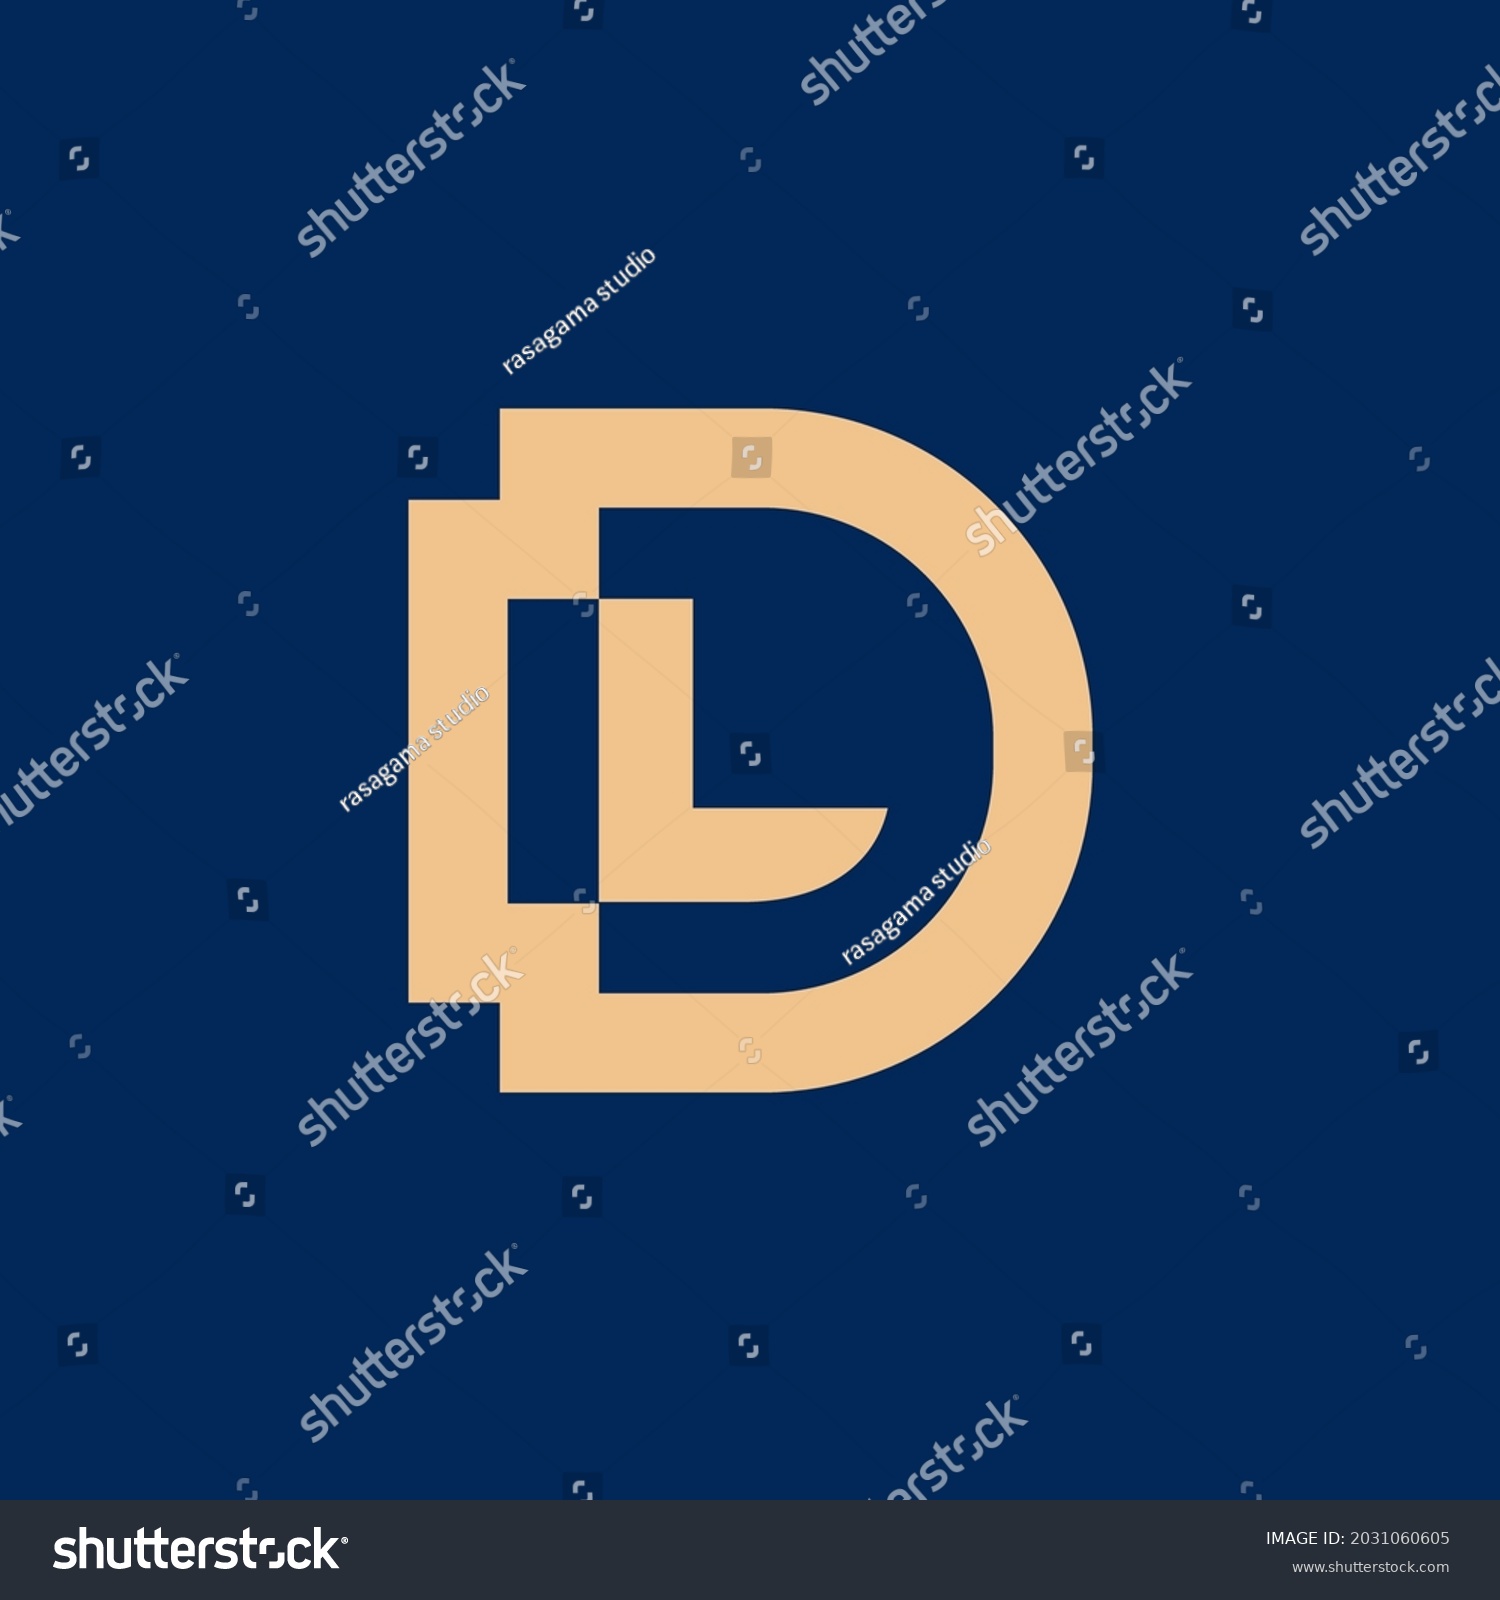 SVG of LD lettermark logo. alphabet logo that combines 2 letters into new mark or symbol that is unique and original. consists of letters L and D.  svg